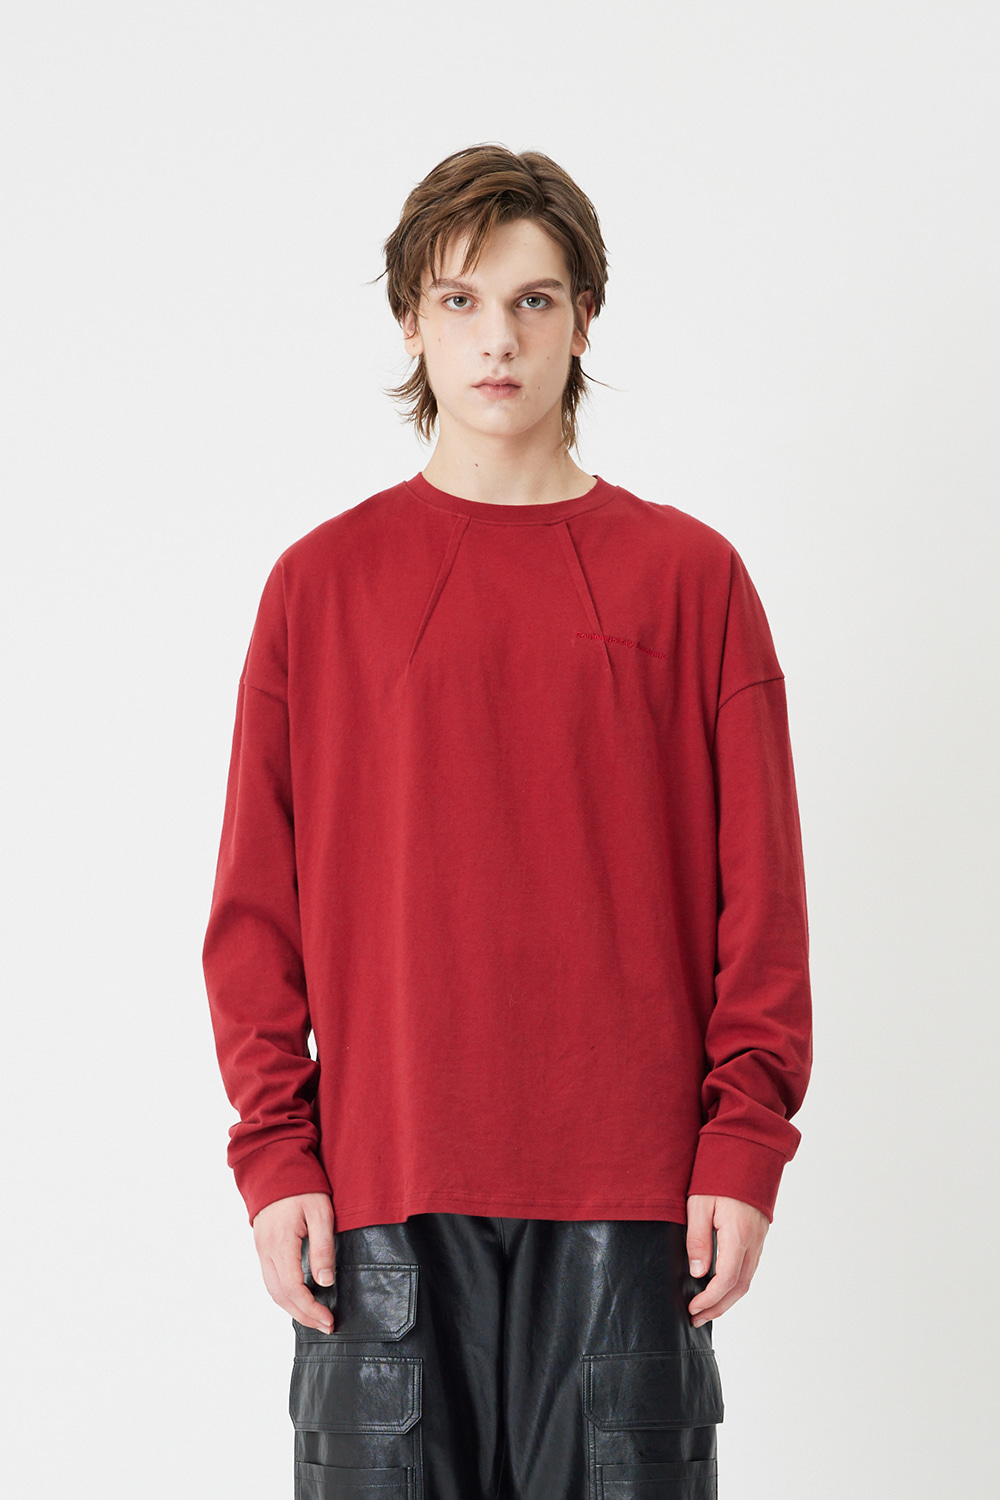 EMBROIDERY DETAIL LONG SLEEVE T-SHIRT (BURGUNDY)